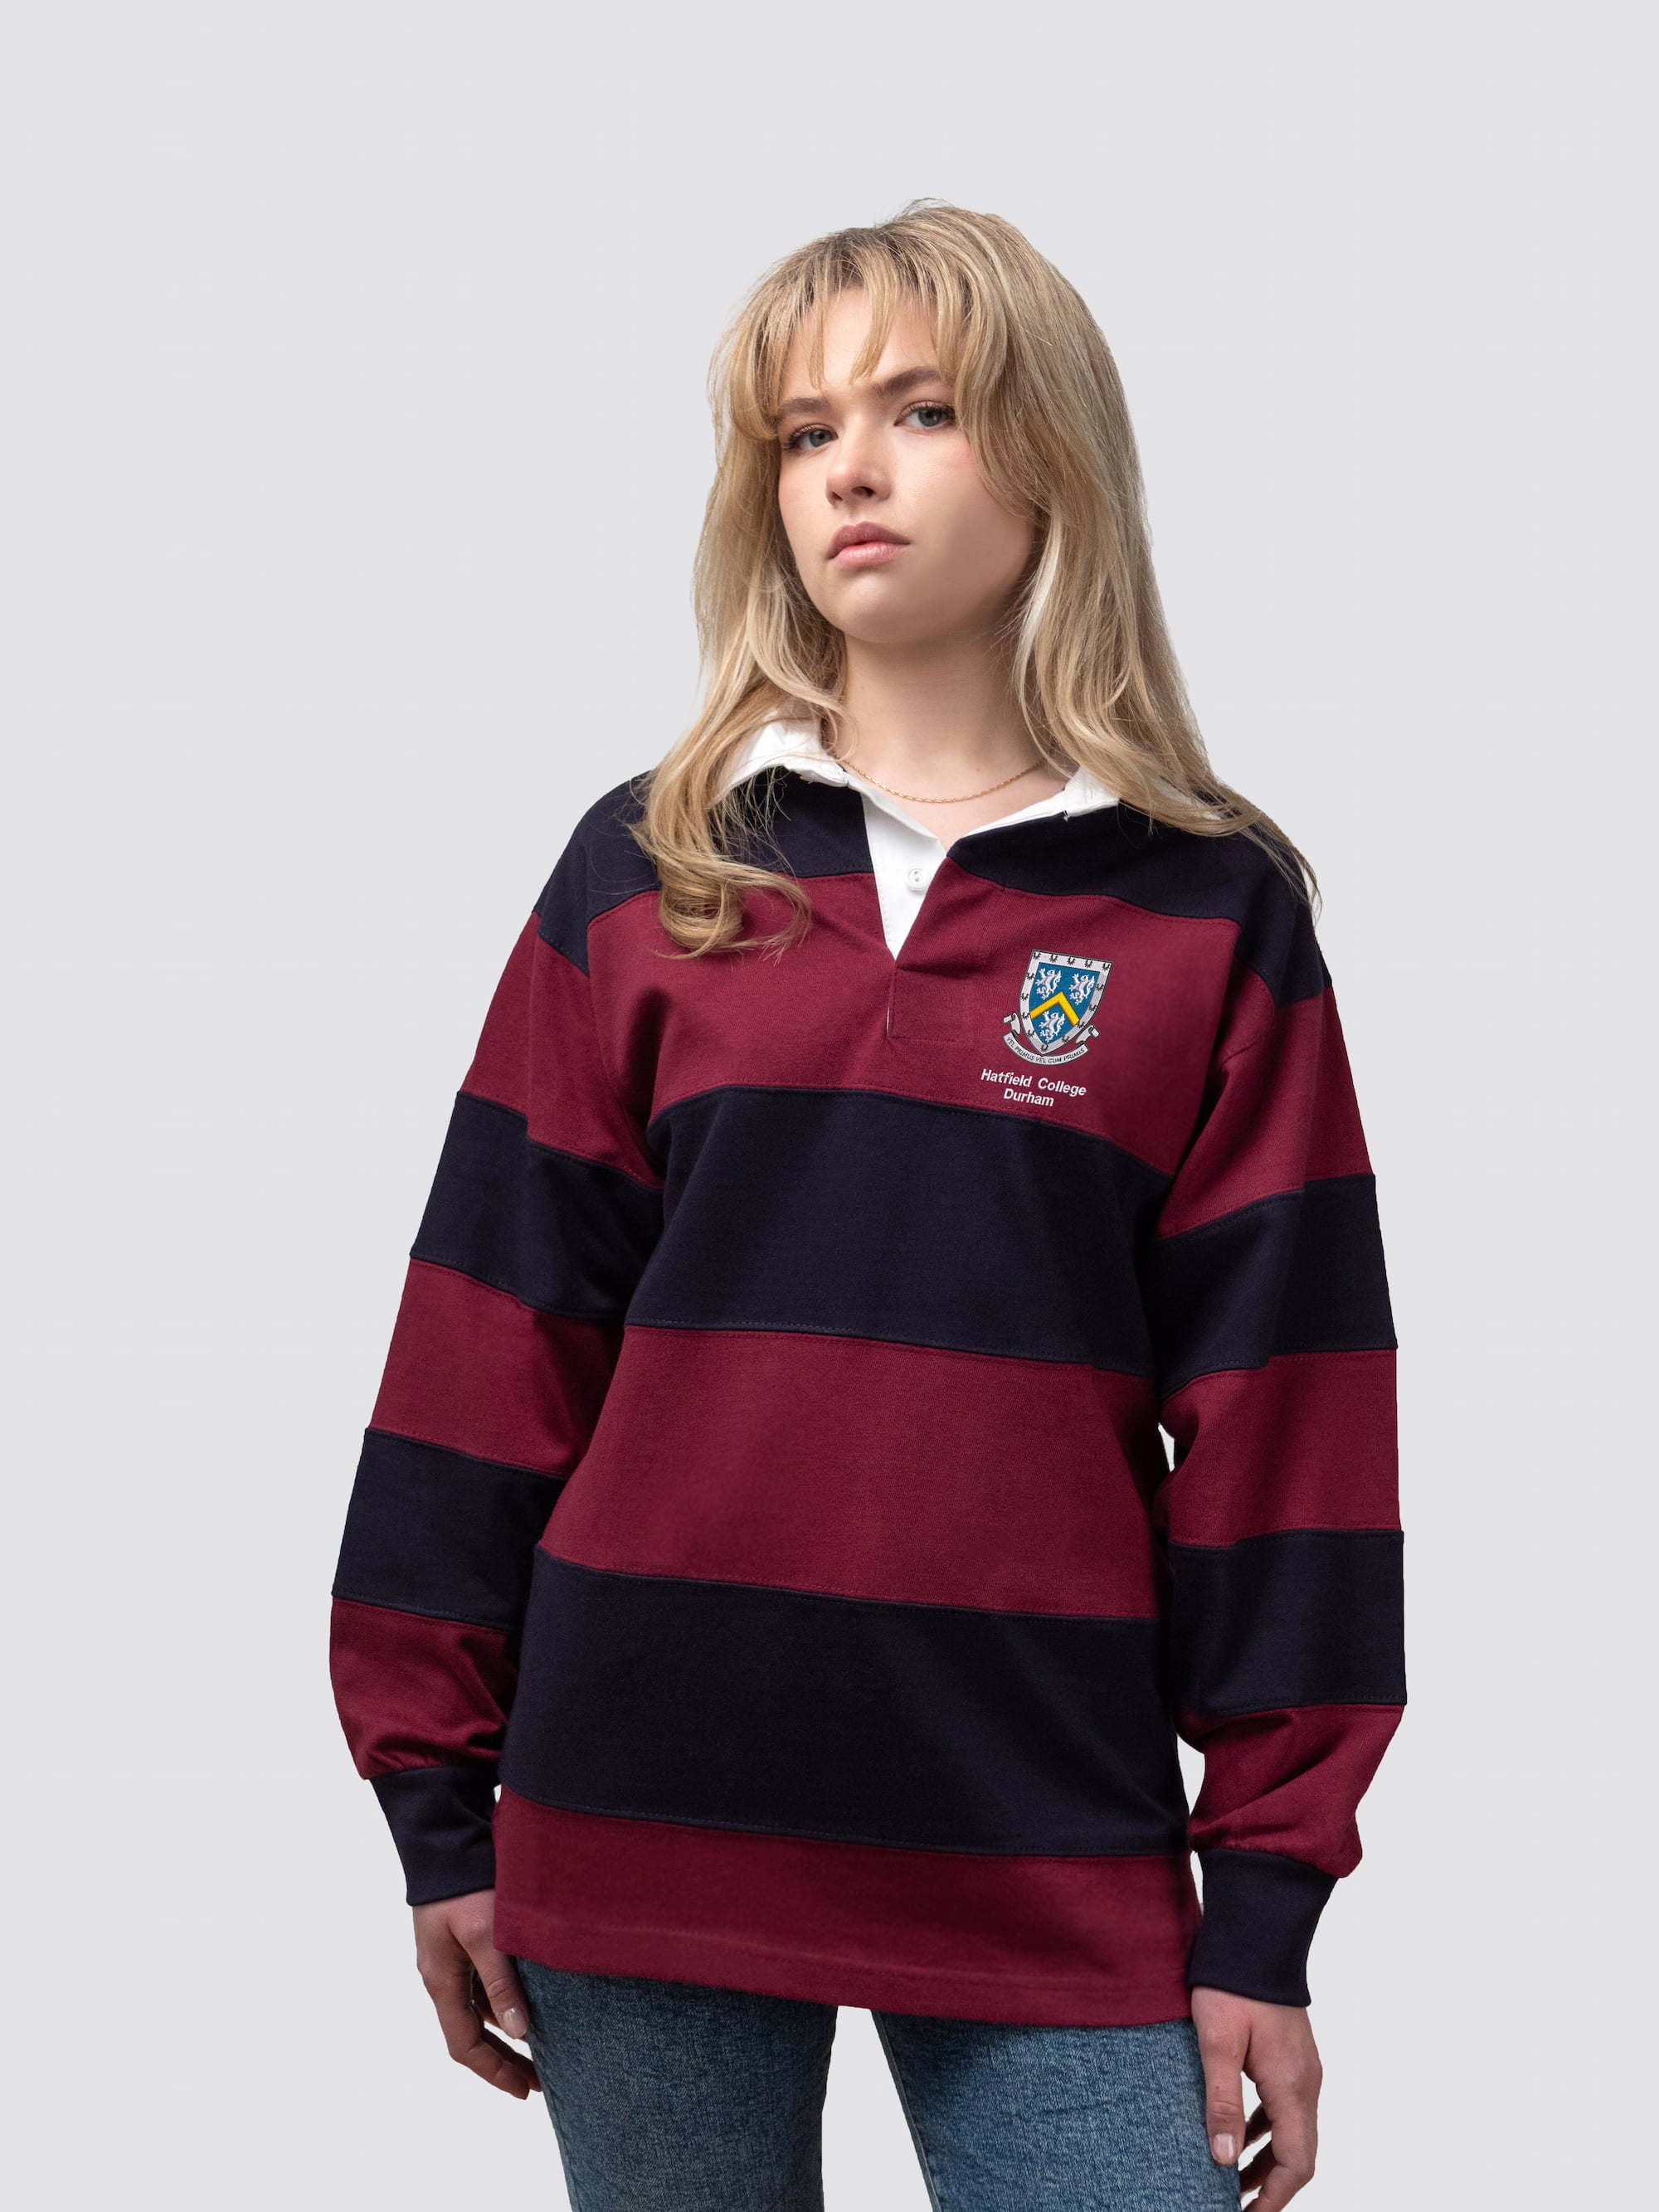 Hatfield College rugby shirt, with burgundy and navy stripes